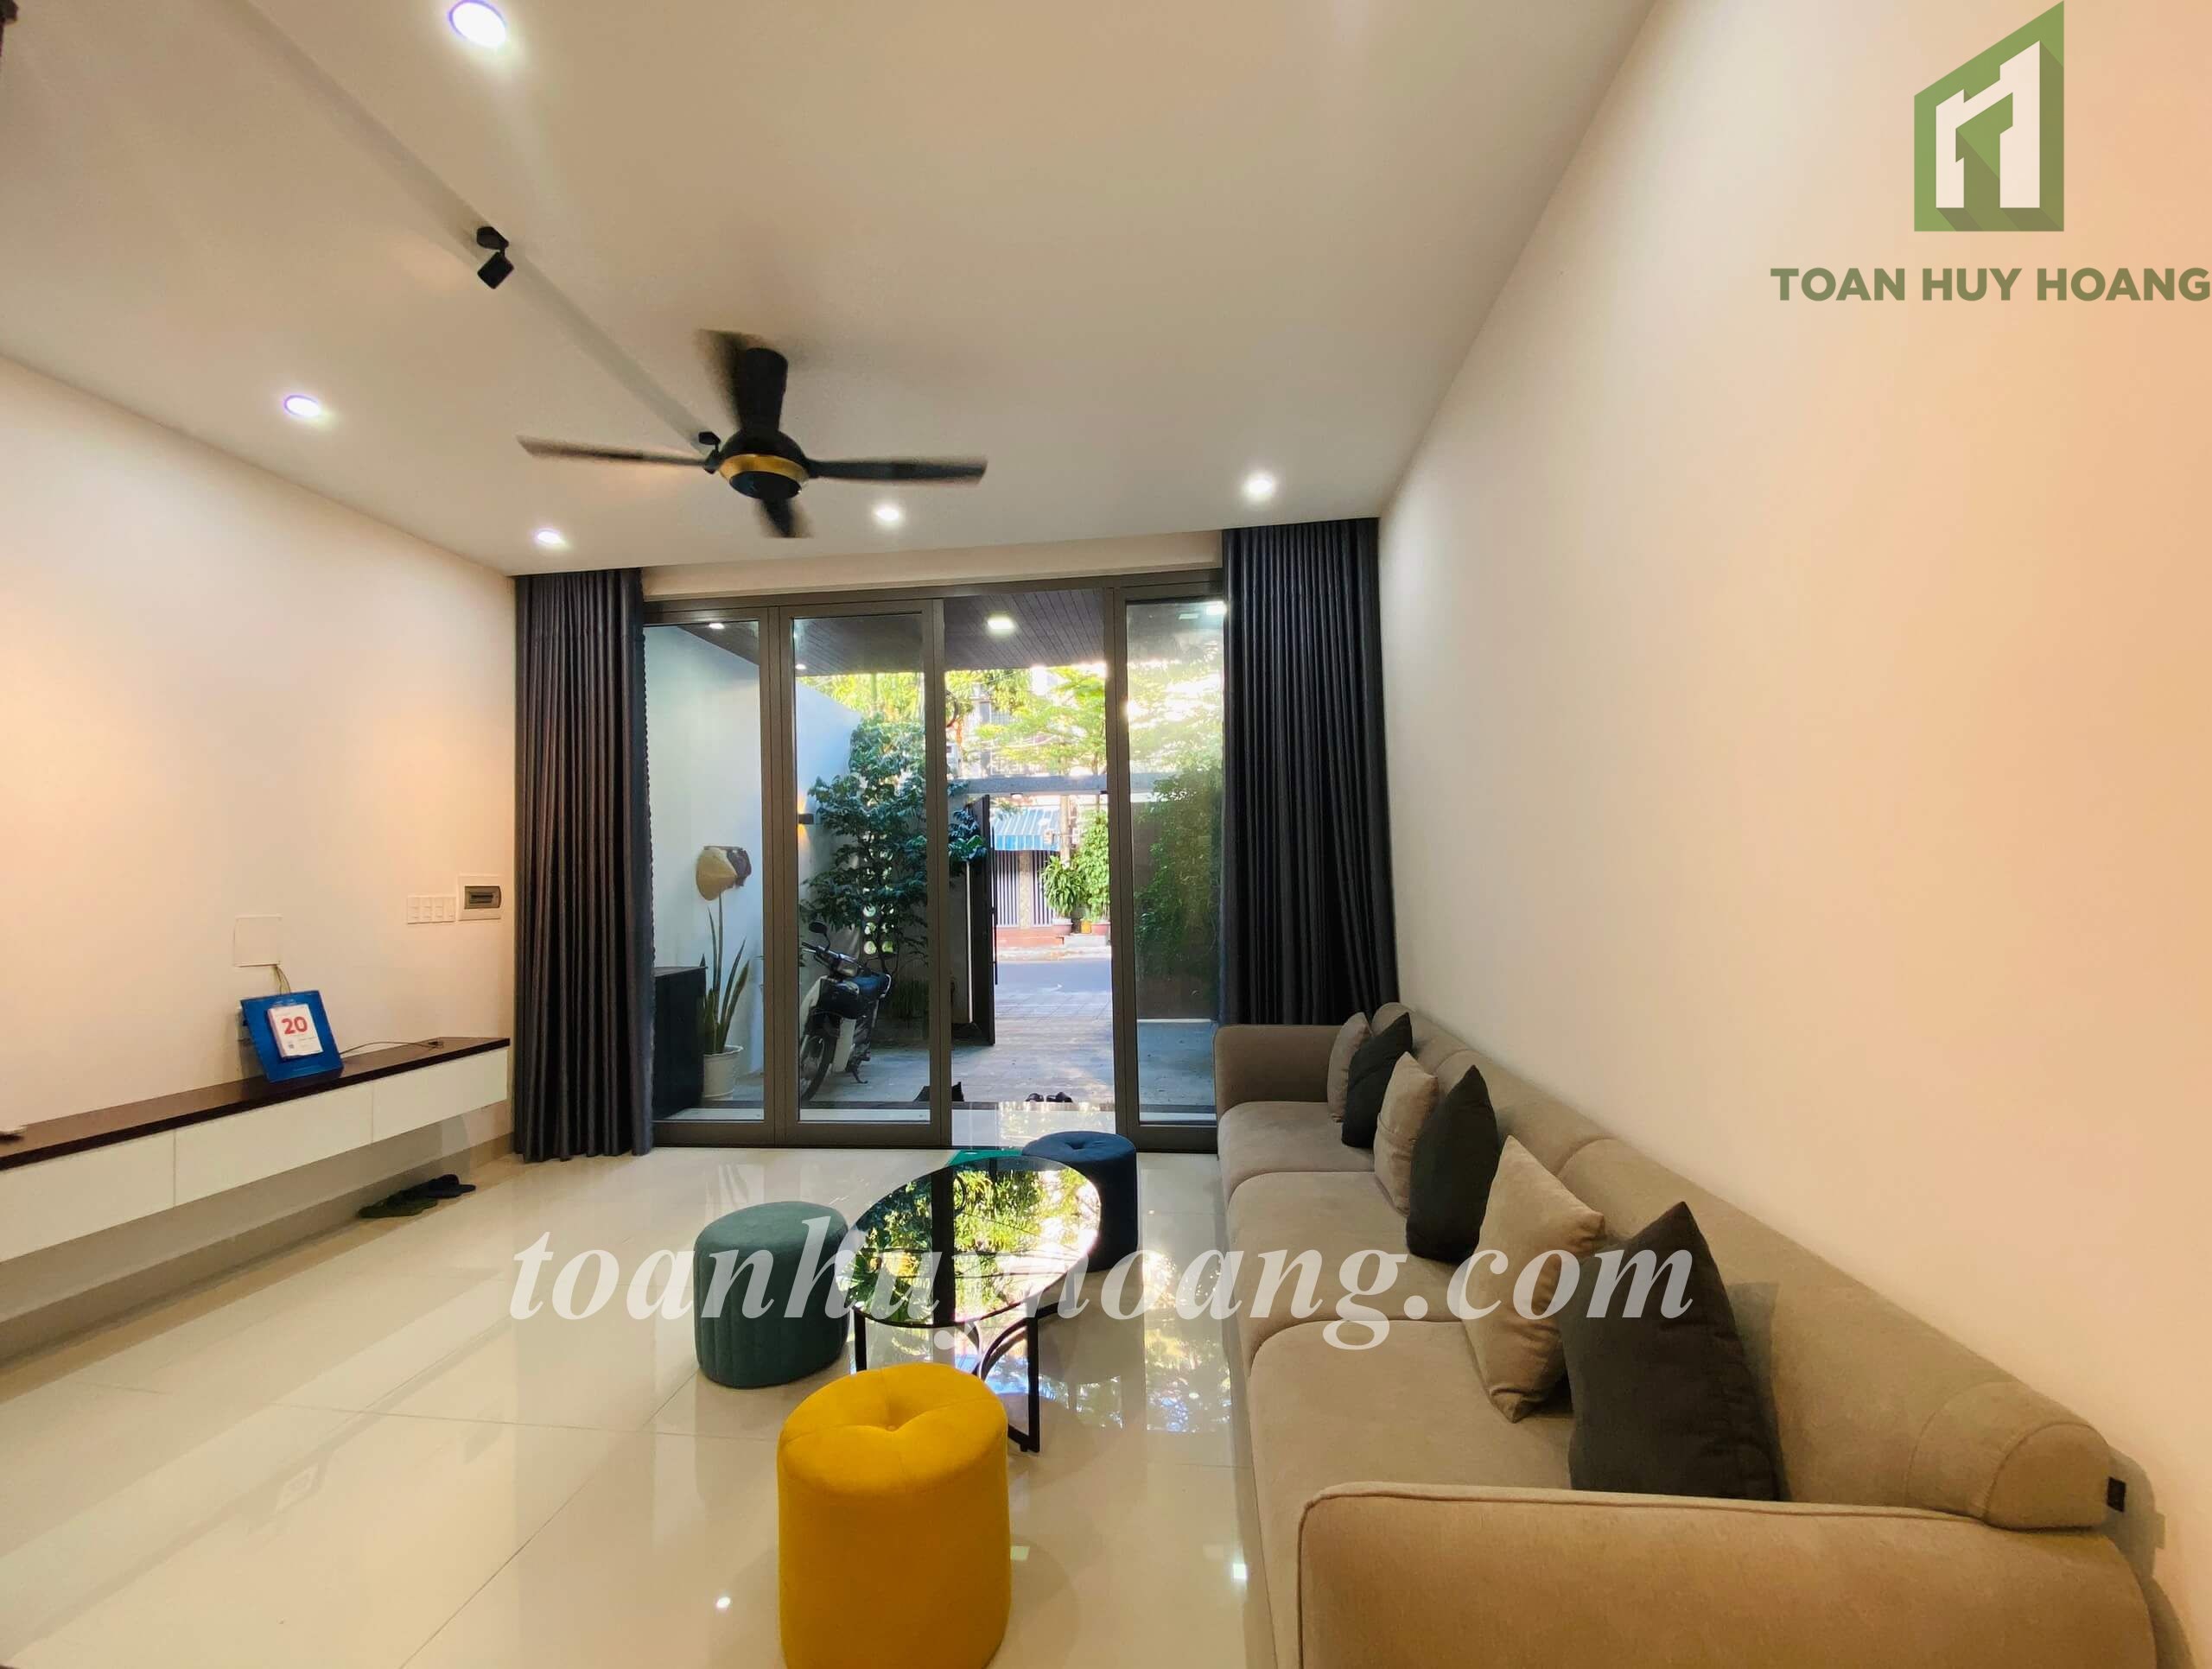 Modern 4 bed Home In My An Ward For Rent With Short Distance To Han River